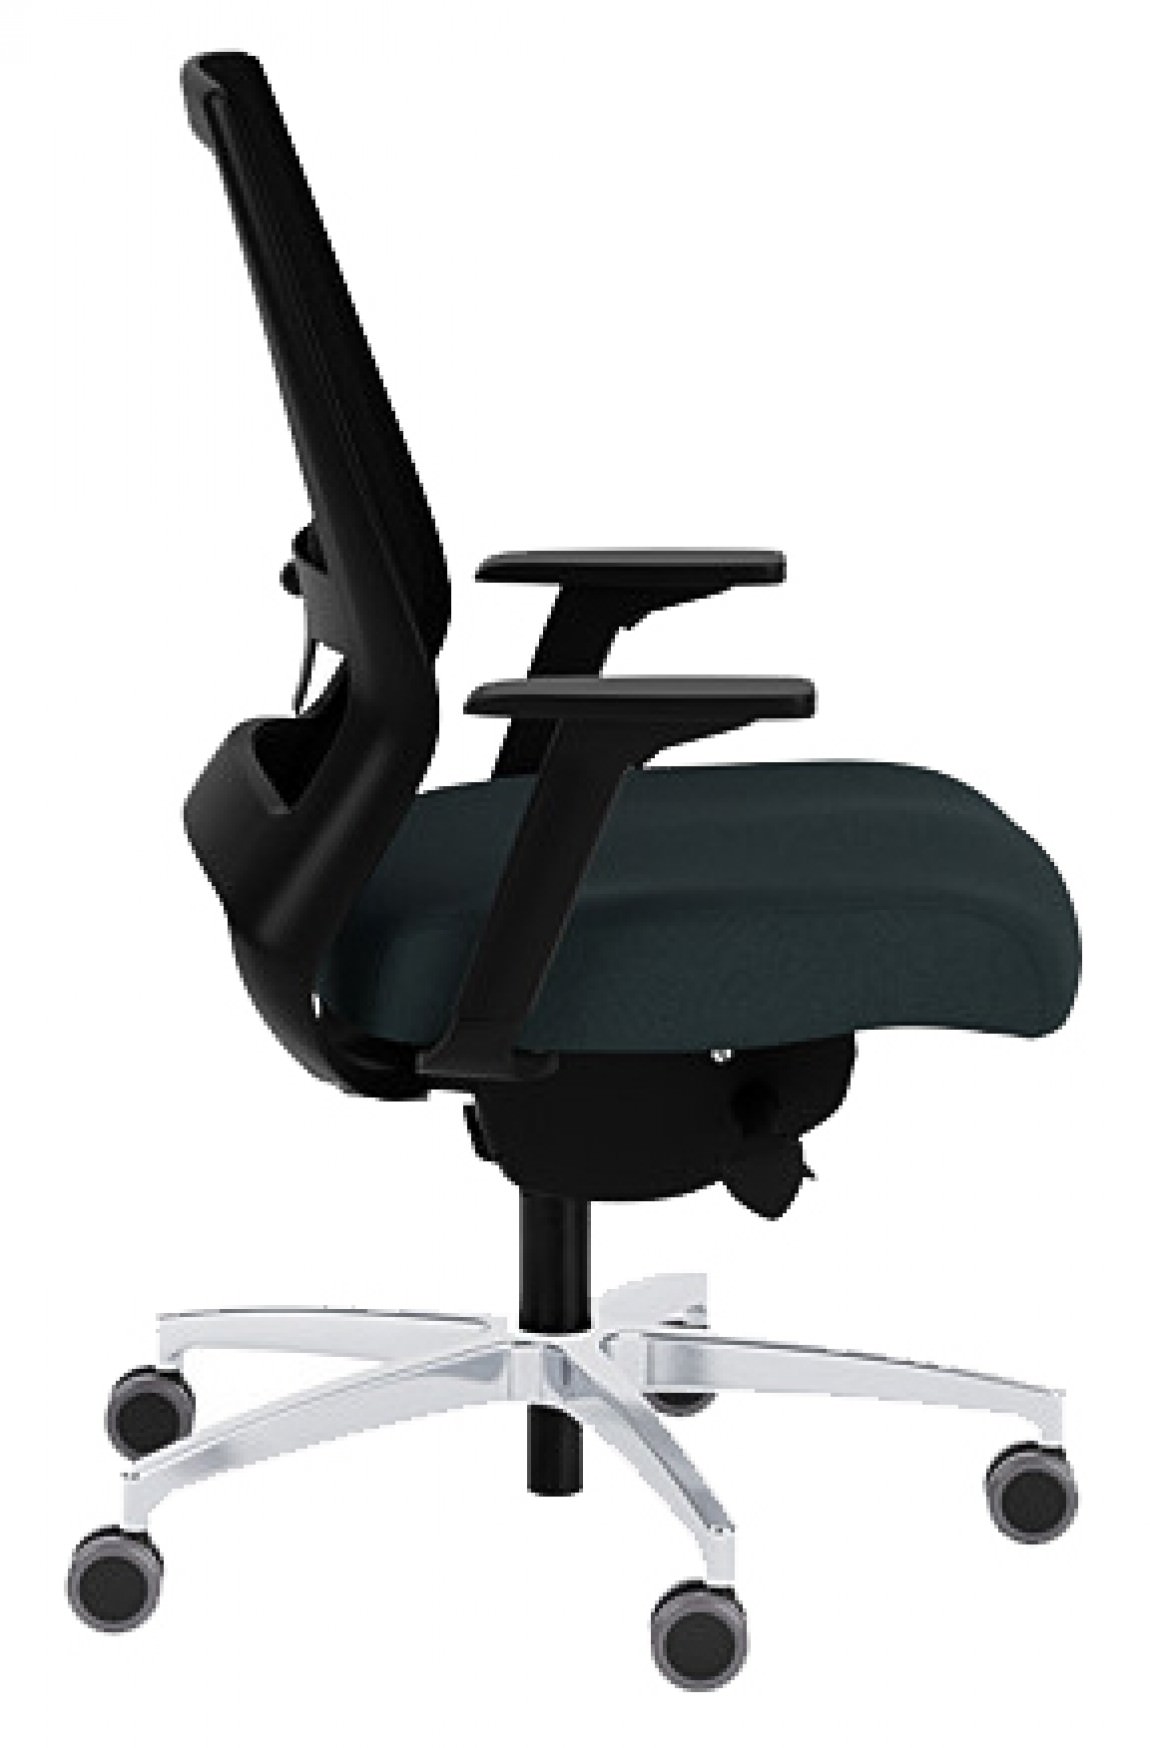 Adjustable Office Chair with Lumbar Support